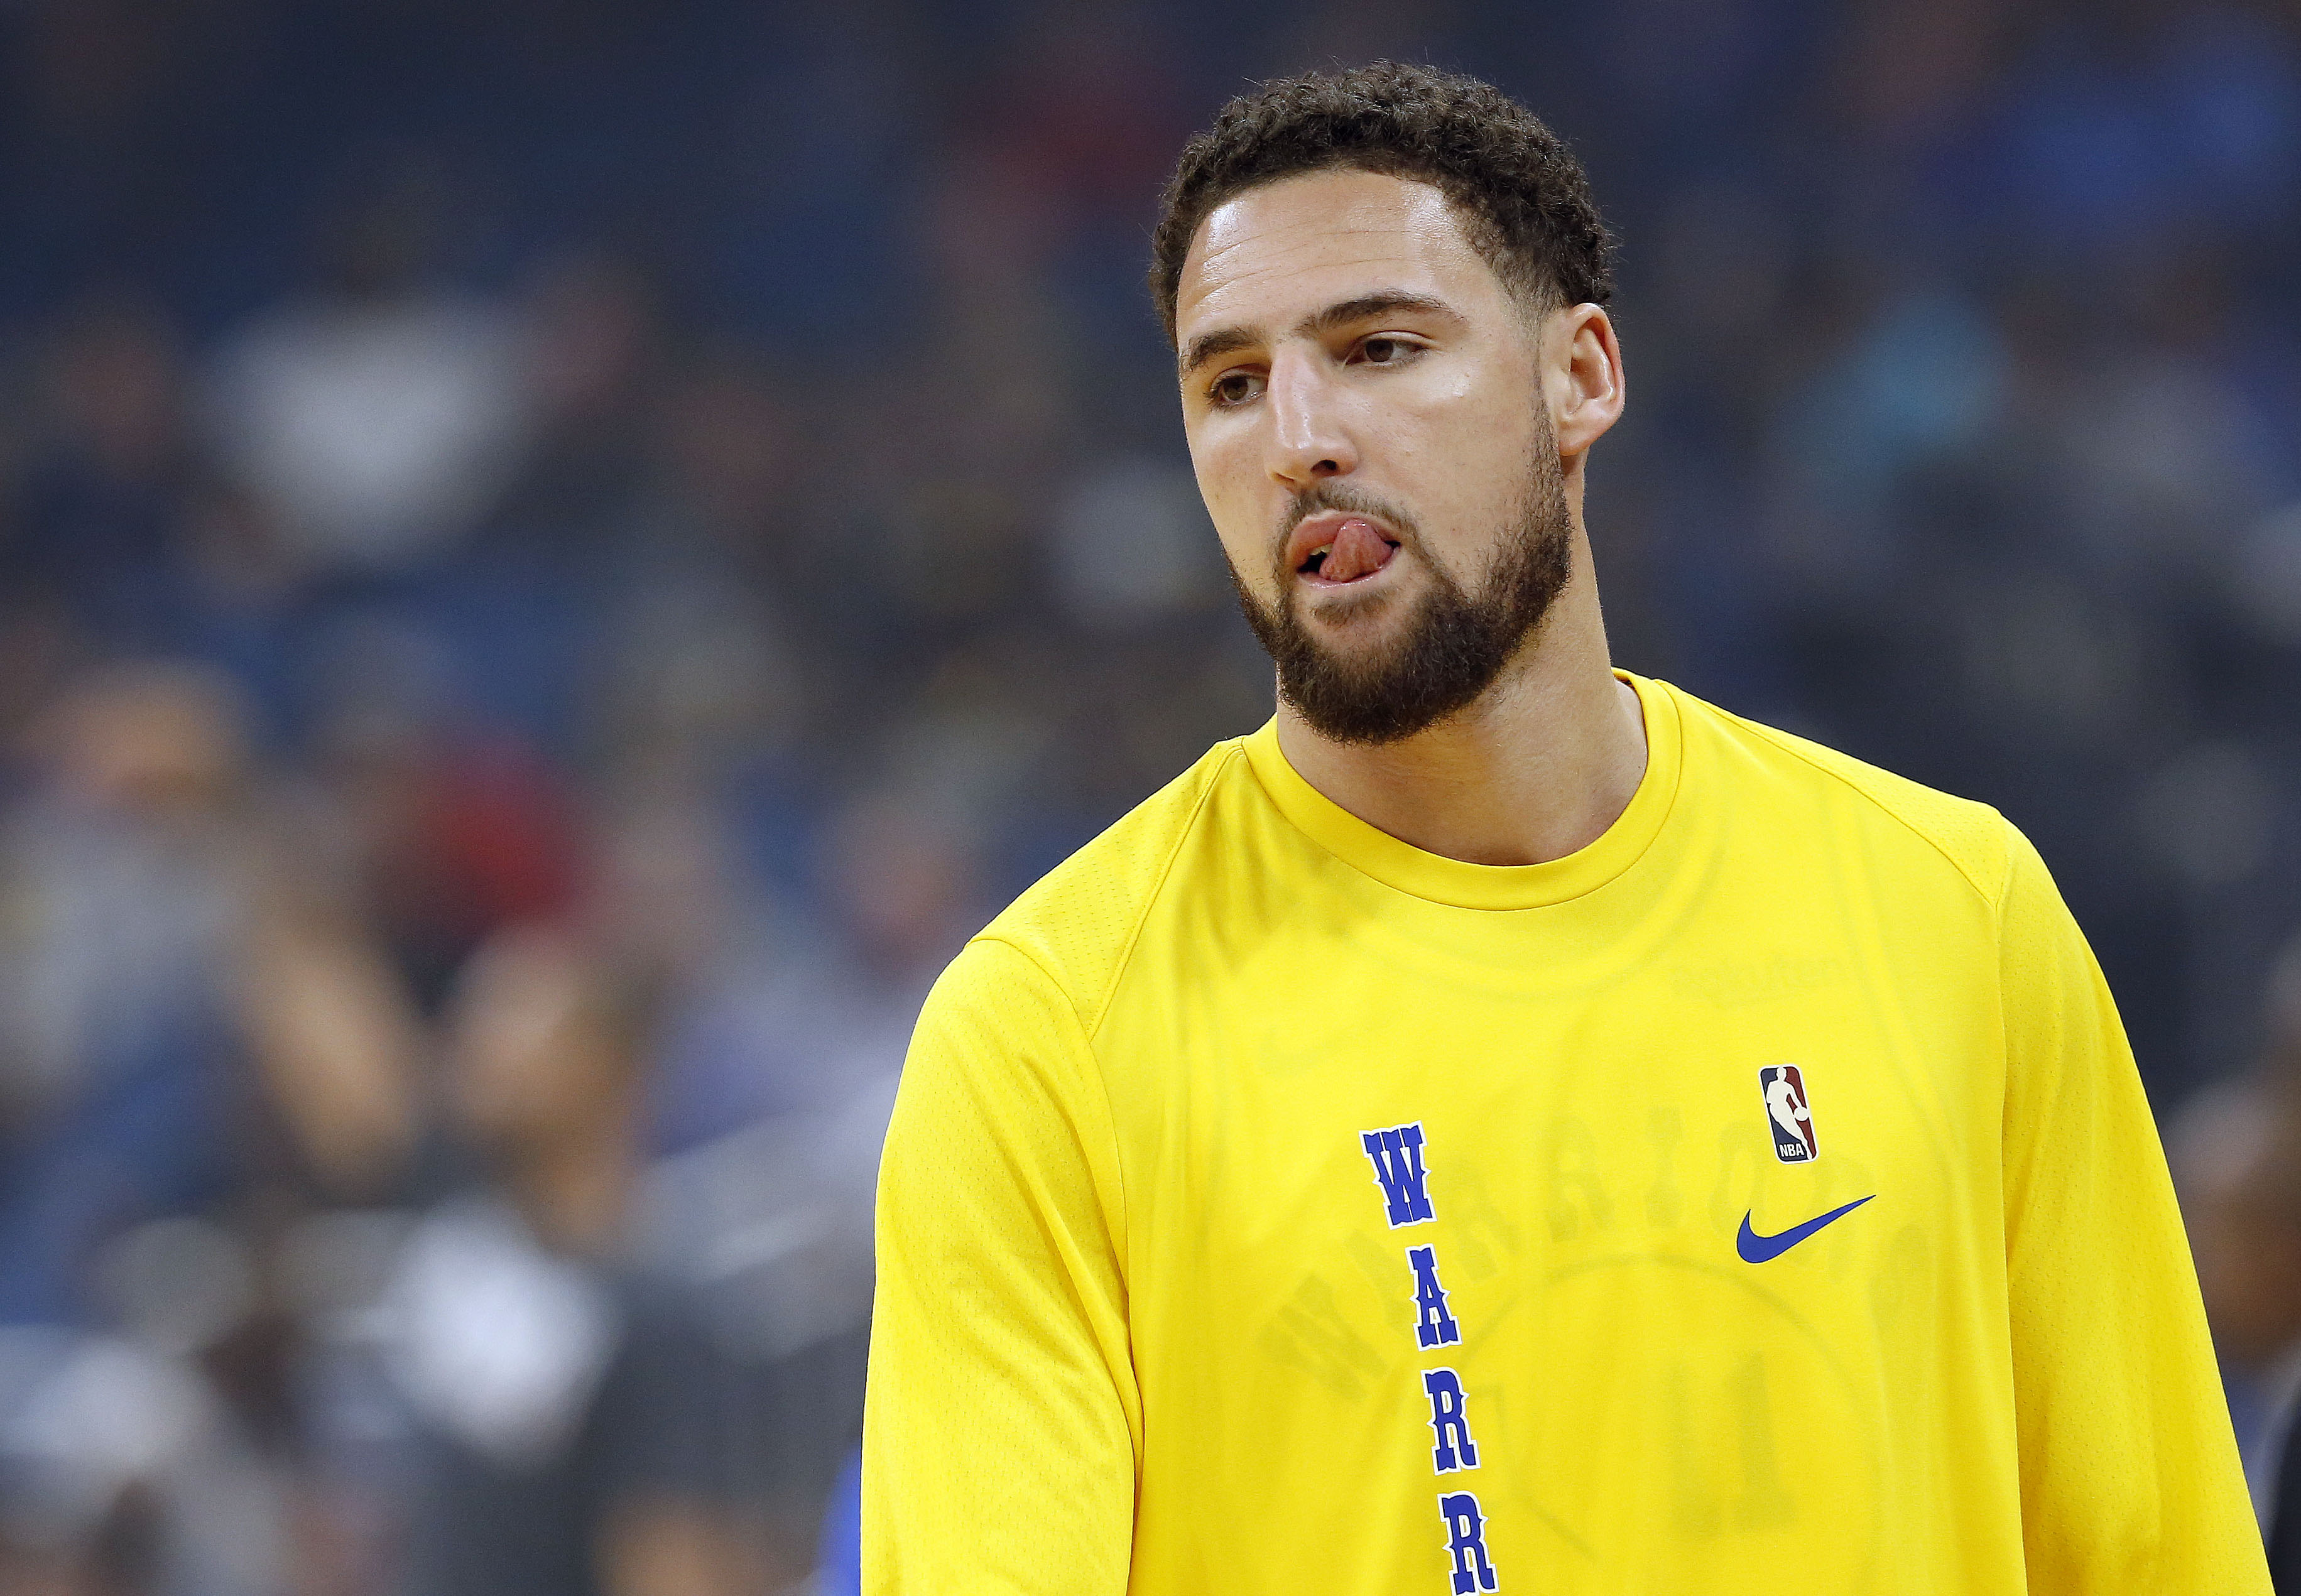 Klay Thompson will take Time to Recover